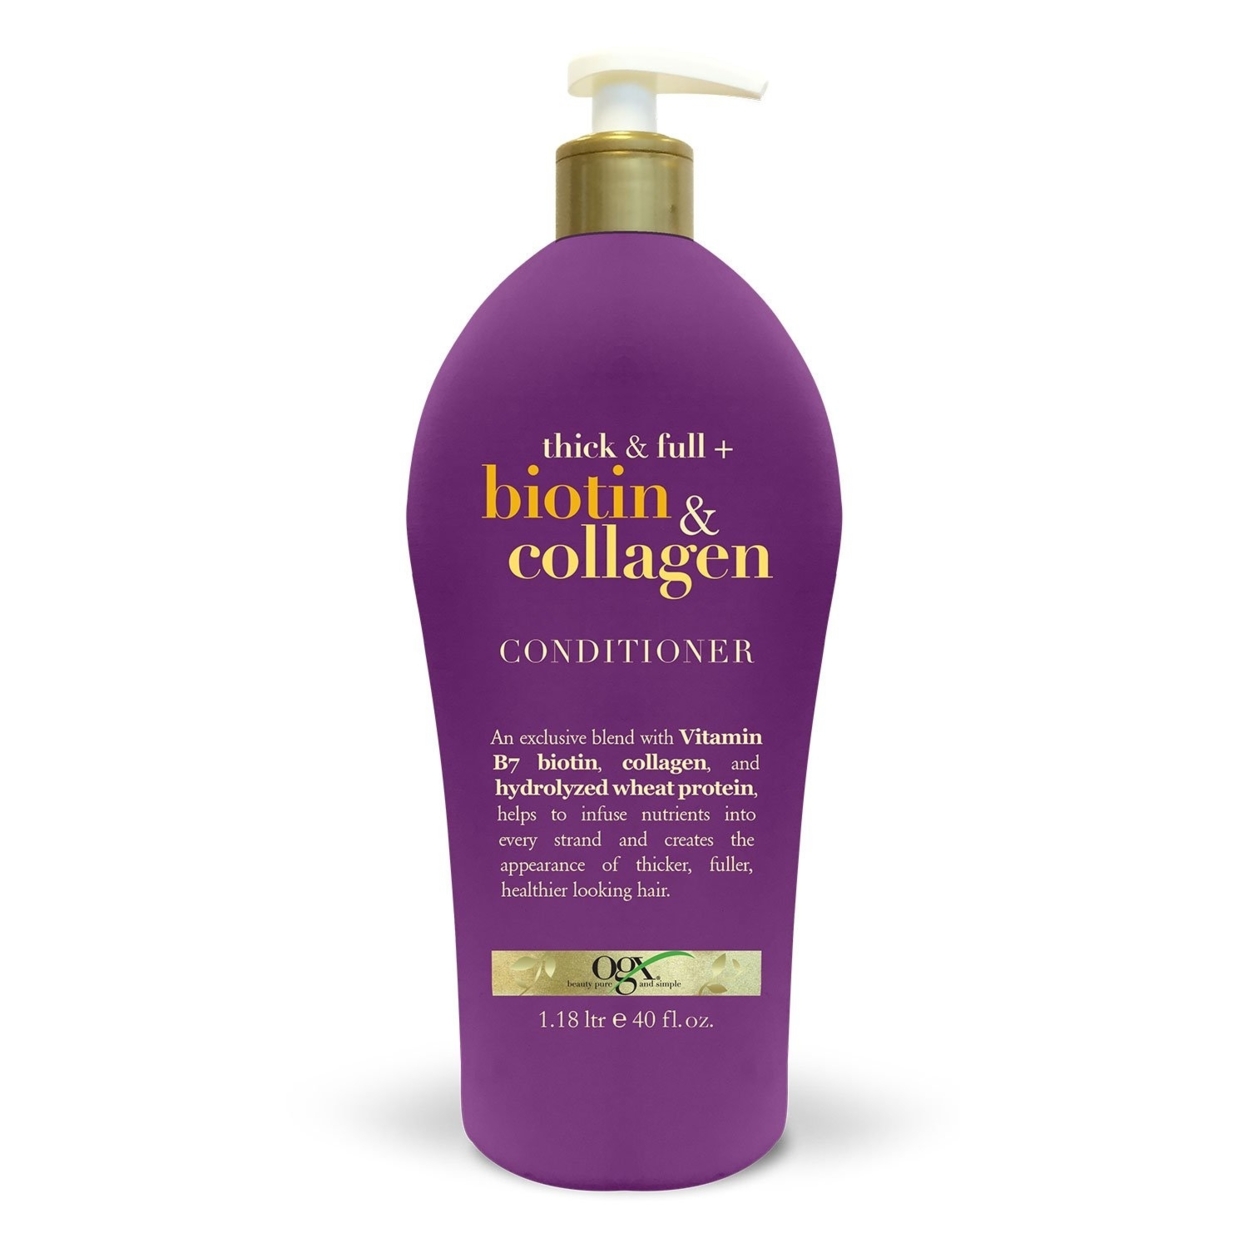 OGX Thick & Full Biotin & Collagen Conditioner (40 Fluid Ounce)